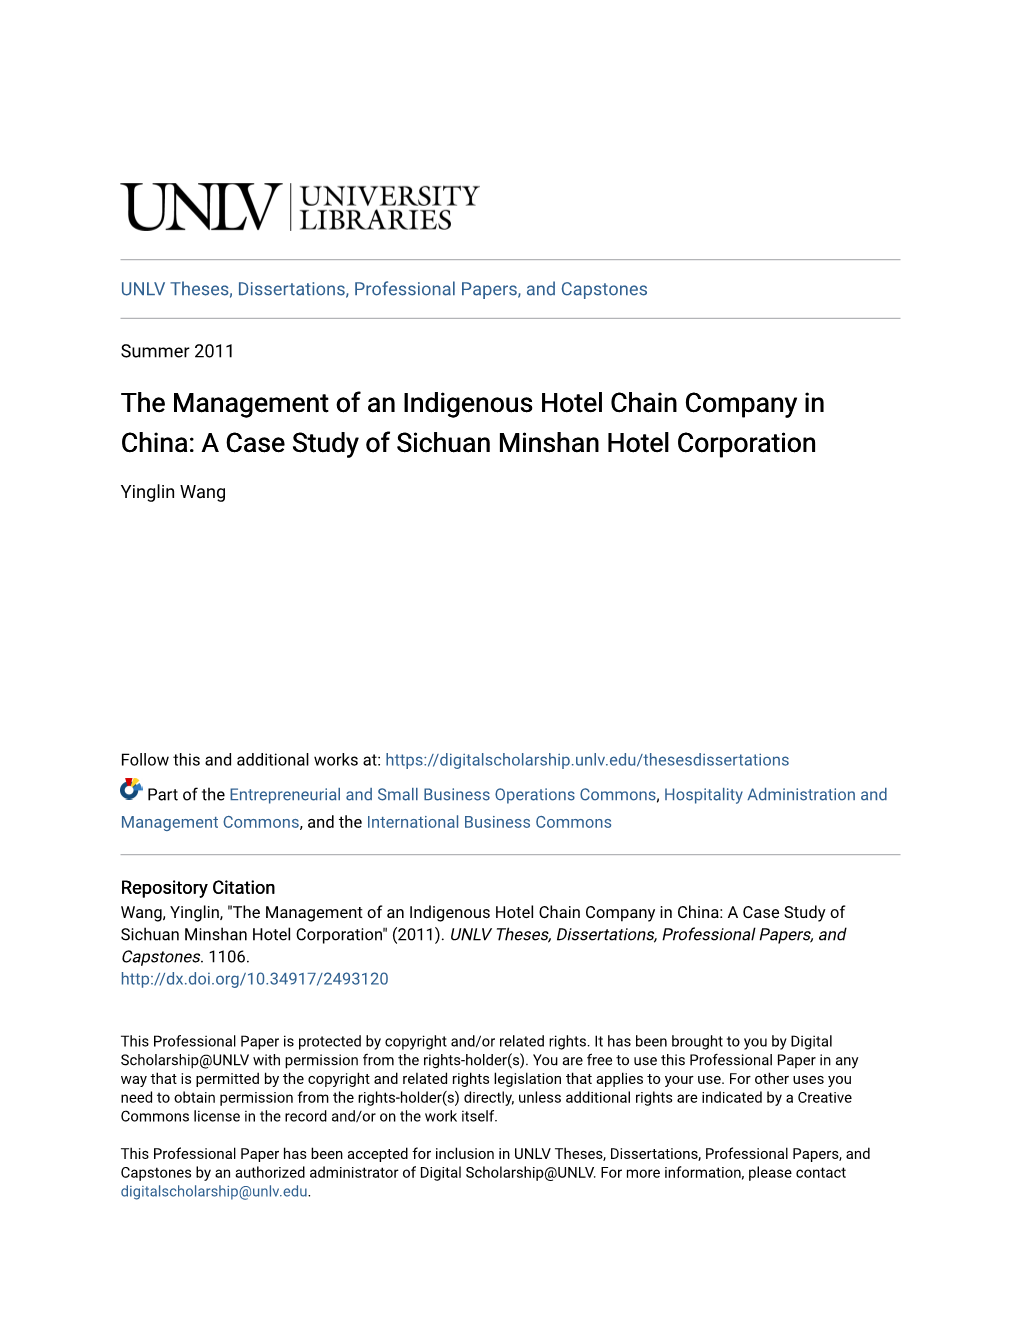 The Management of an Indigenous Hotel Chain Company in China: a Case Study of Sichuan Minshan Hotel Corporation